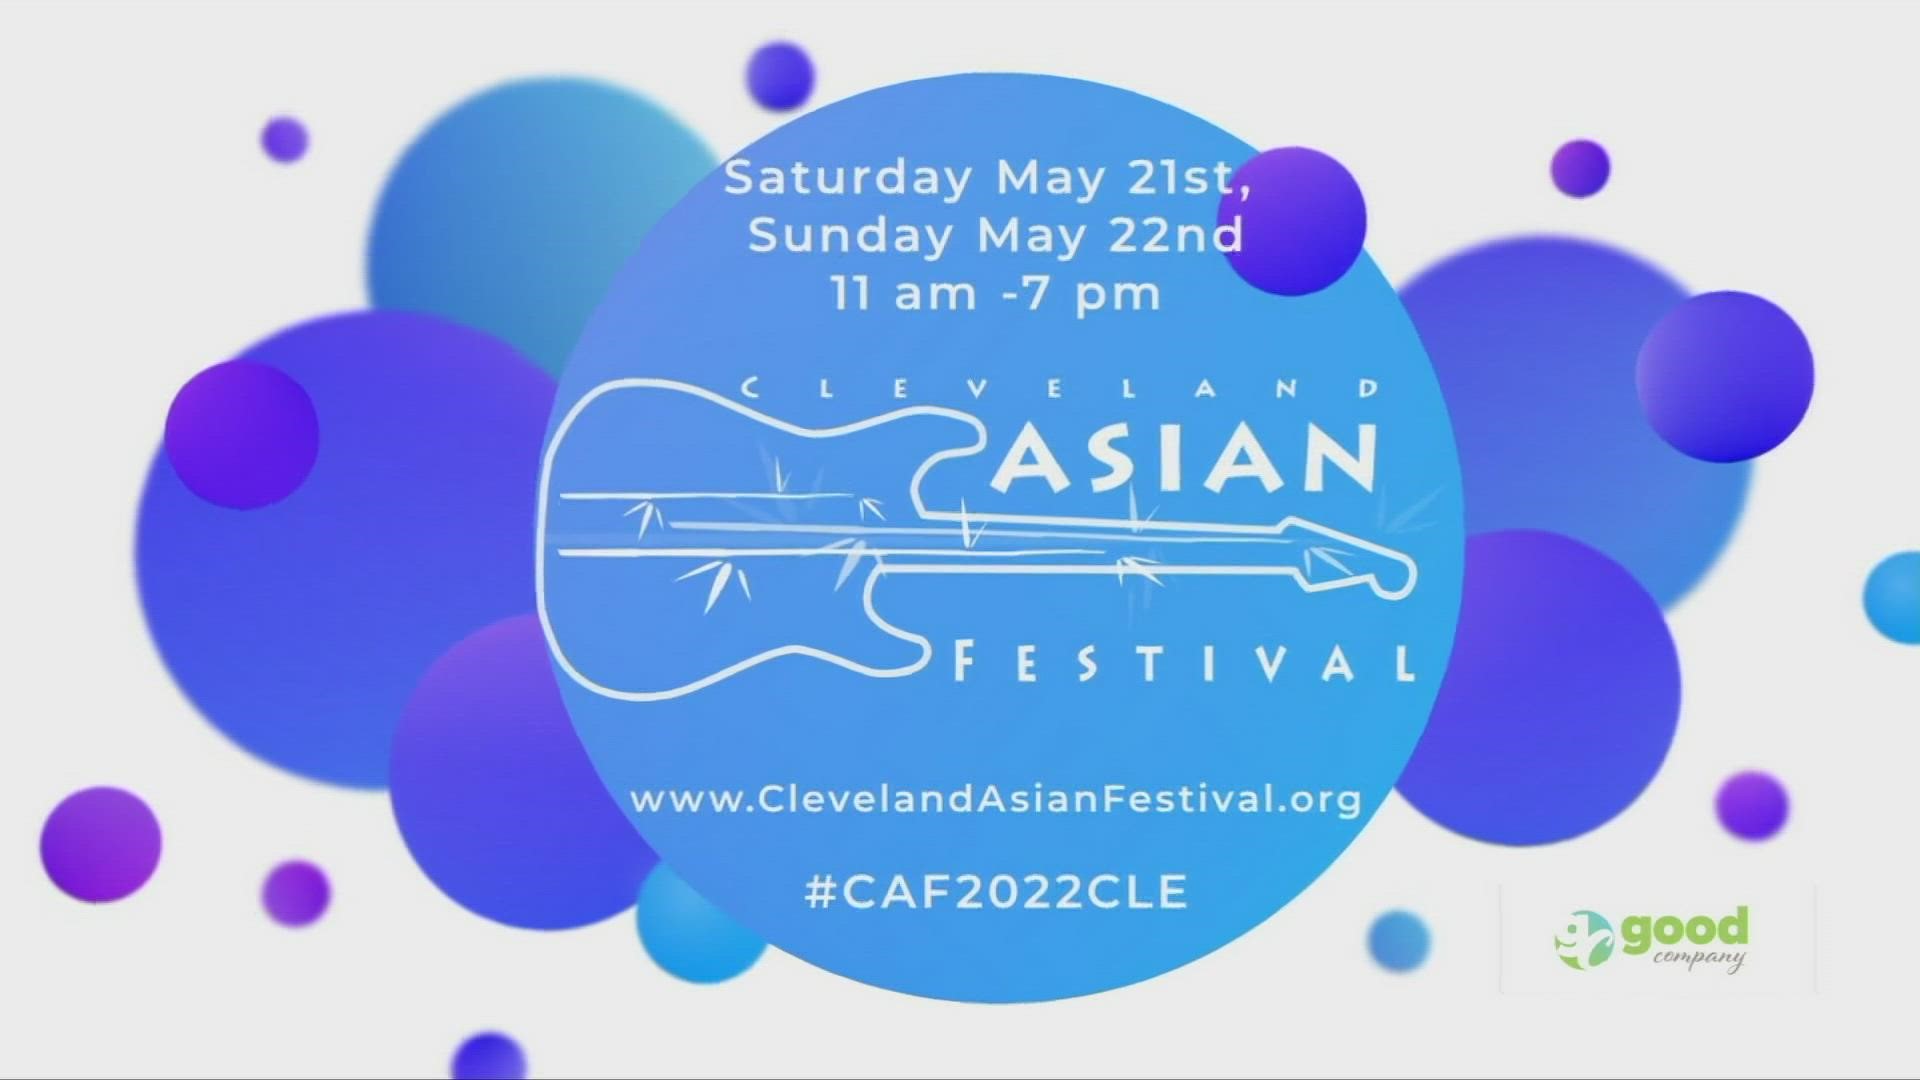 Johnny K. Wu & Lisa Wong share more details on this year's Cleveland Asian Festival!